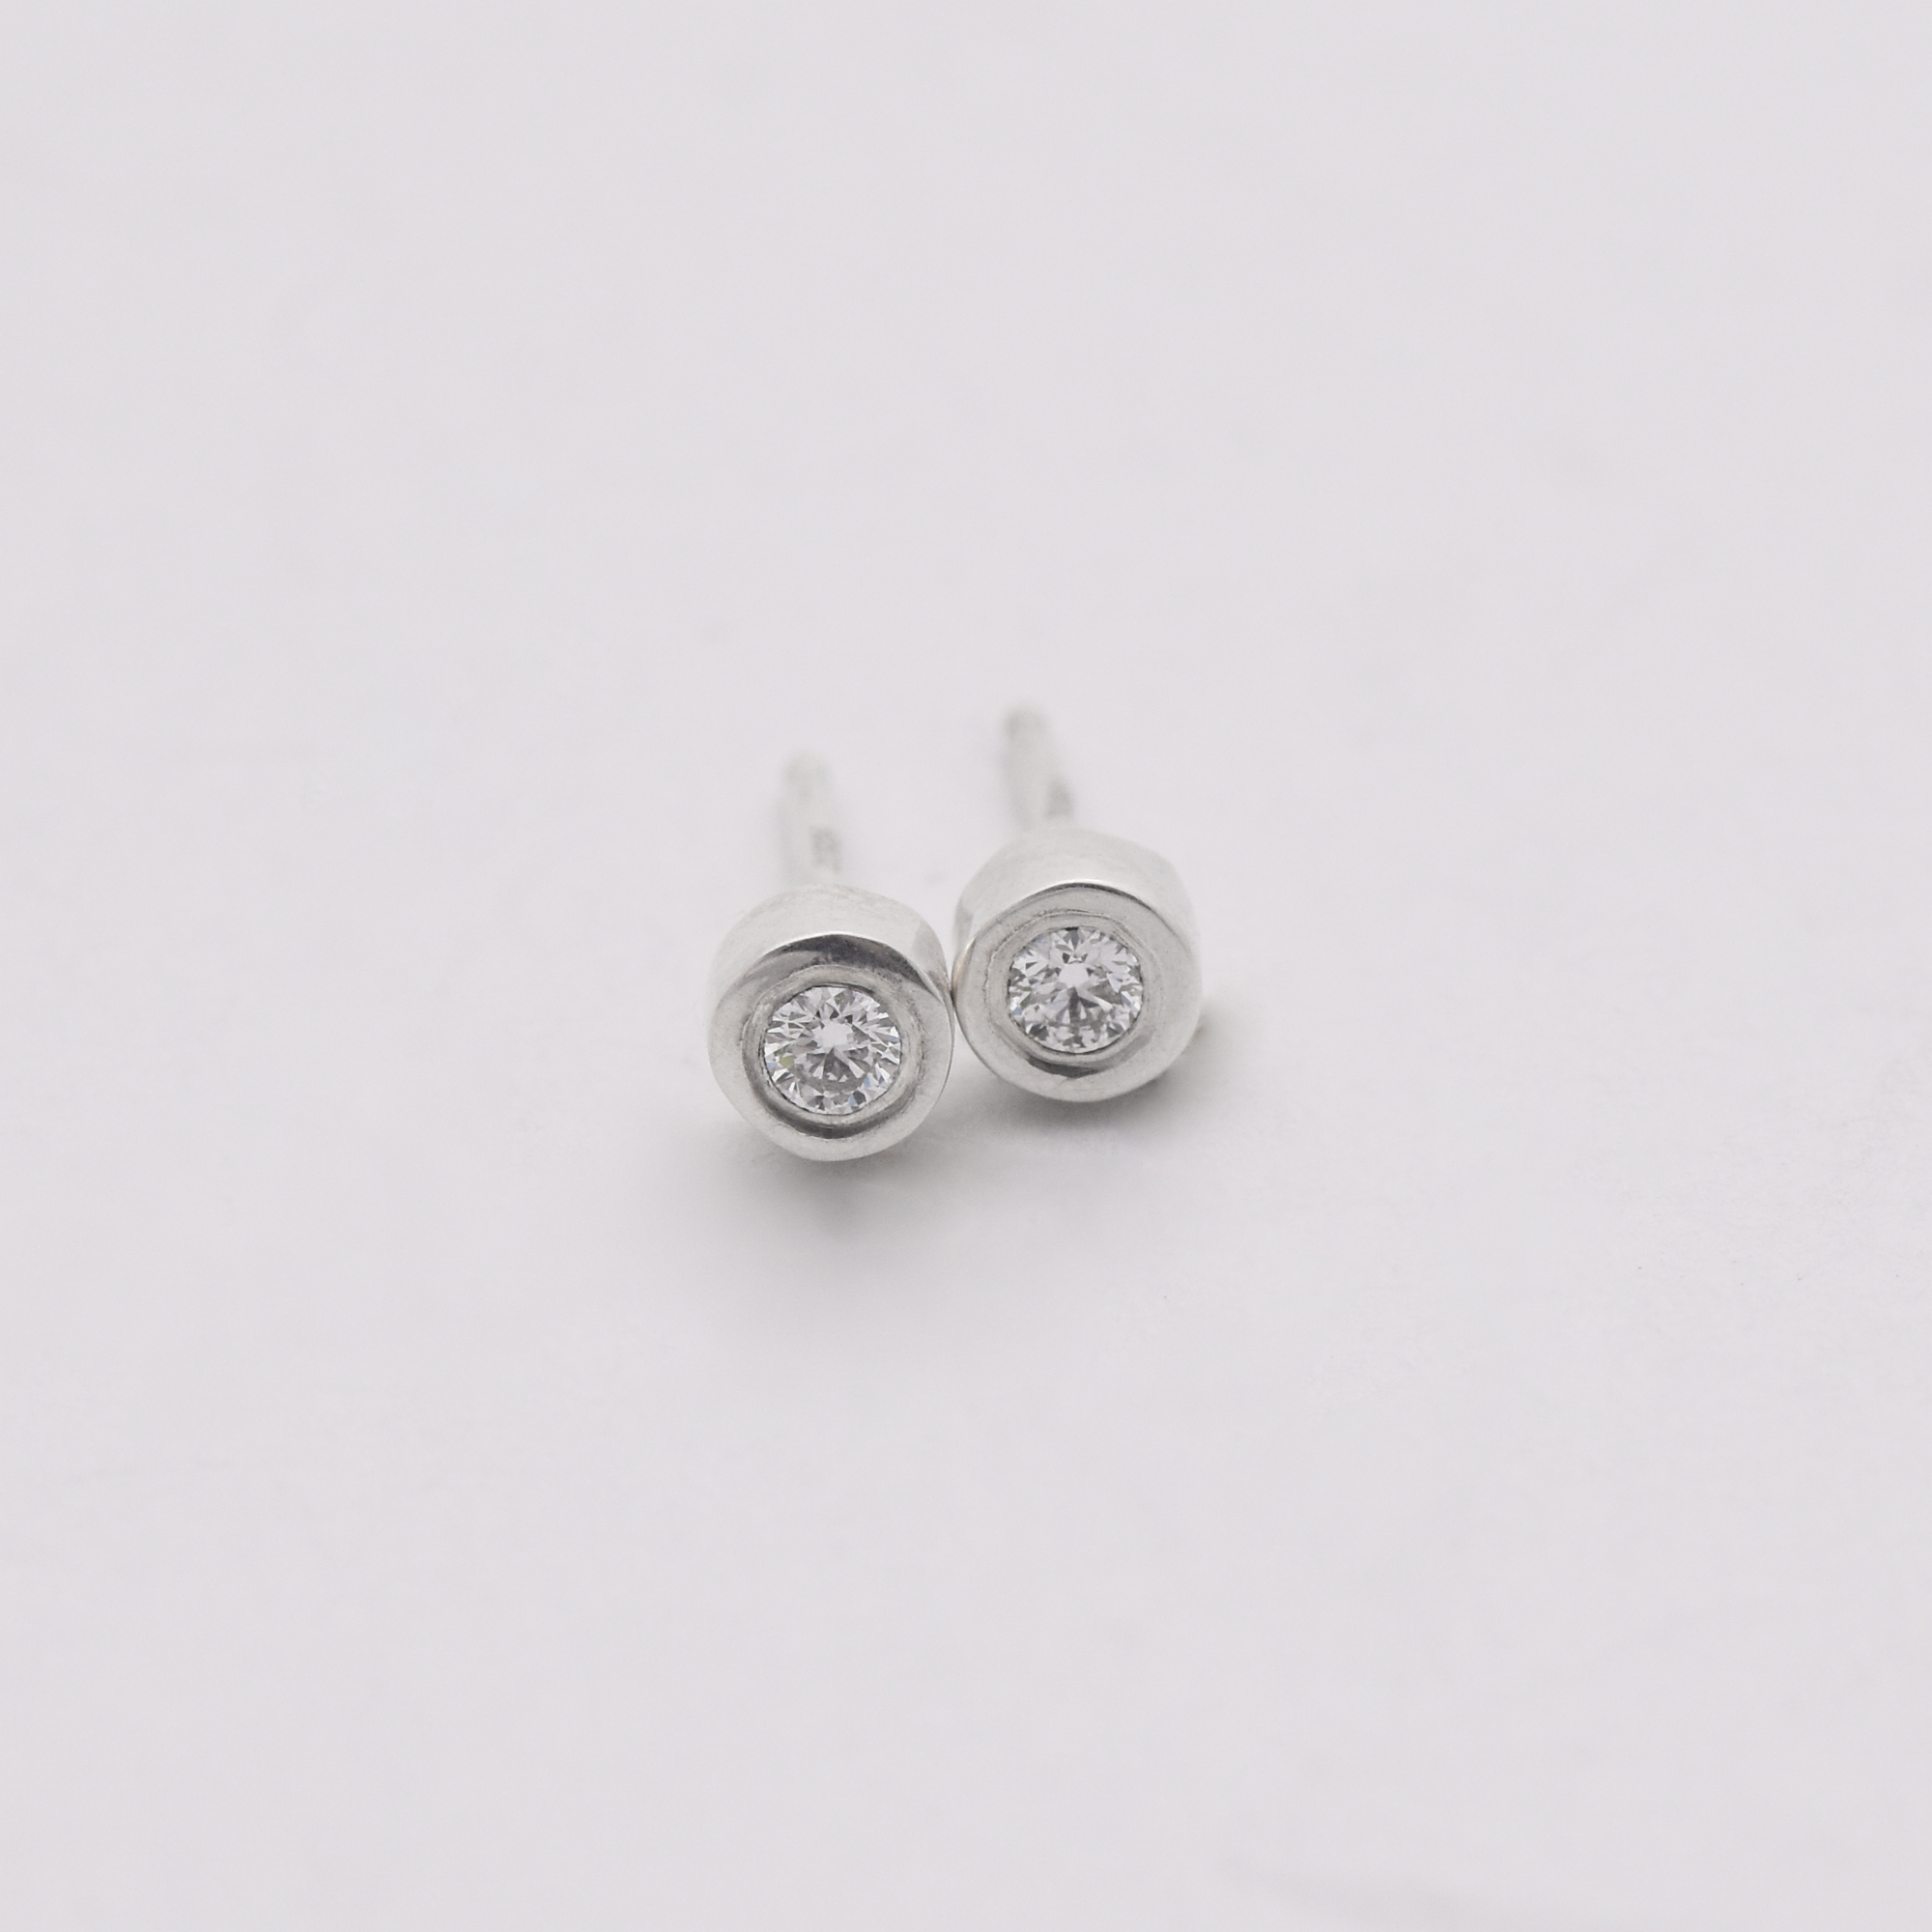 2.5 mm lab grown diamond studs set in an organically carved and solid cast sterling silver or 18k gold setting. 